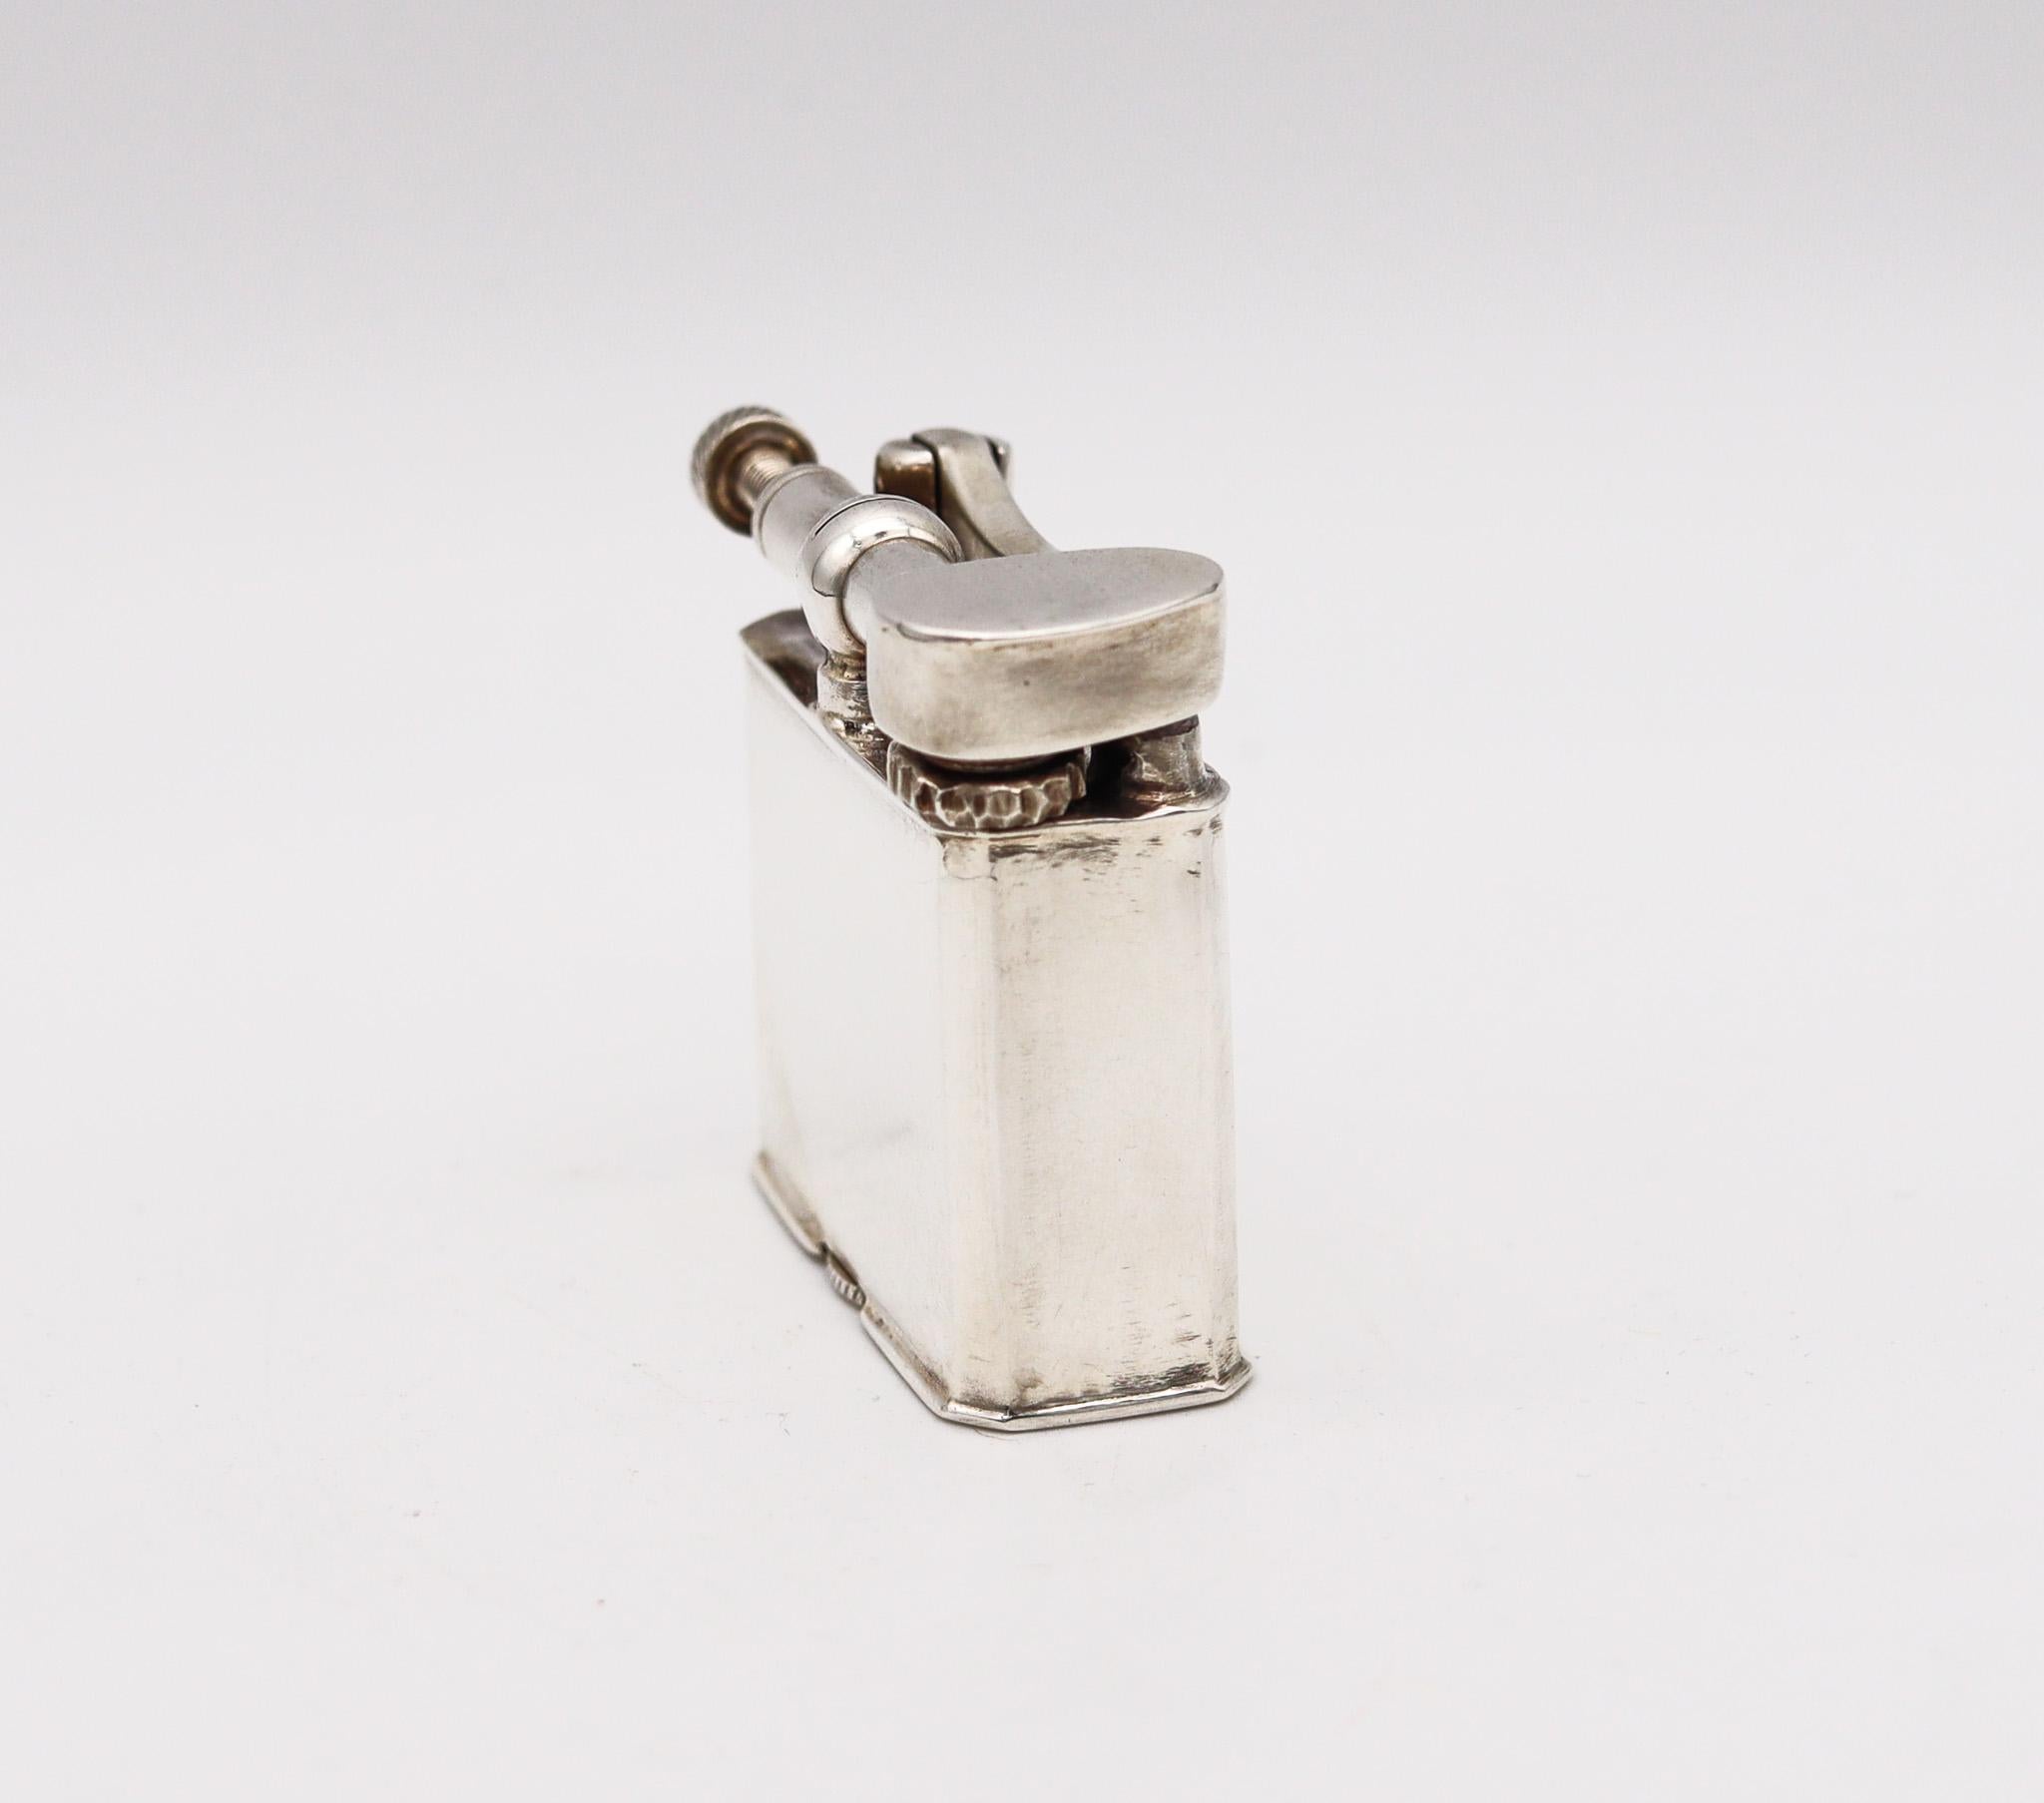 Art Deco Mexico Taxco 1940 Unique Lift Arm Petrol Lighter in Solid .925 Sterling Silver